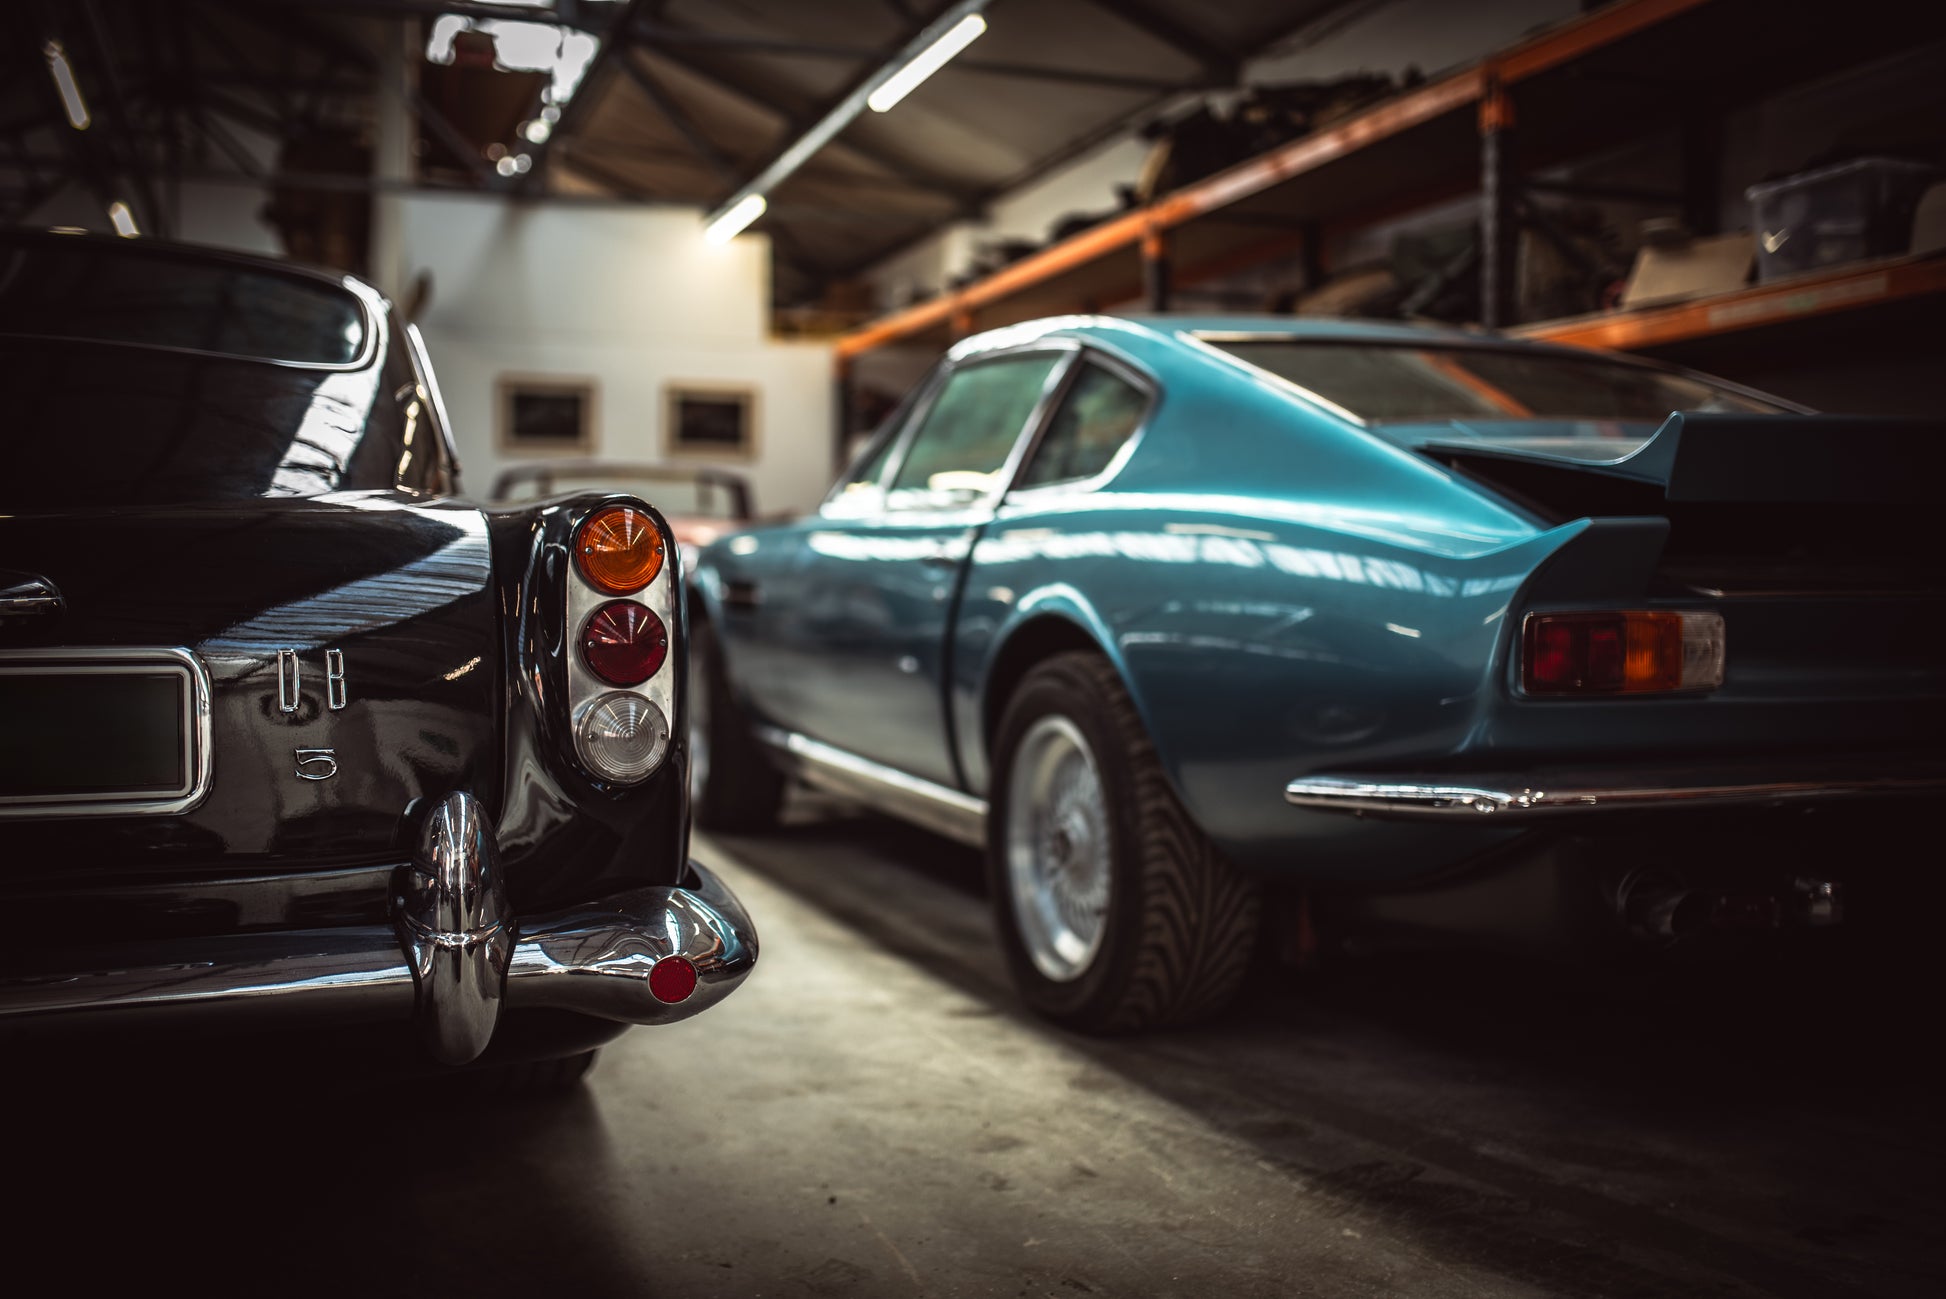 Pair of British classic Aston Martins DB5 and V8 parked up in a garage. Automotive Photography, classic car, vintage vehicle, car photography. Photo print, wall decor.